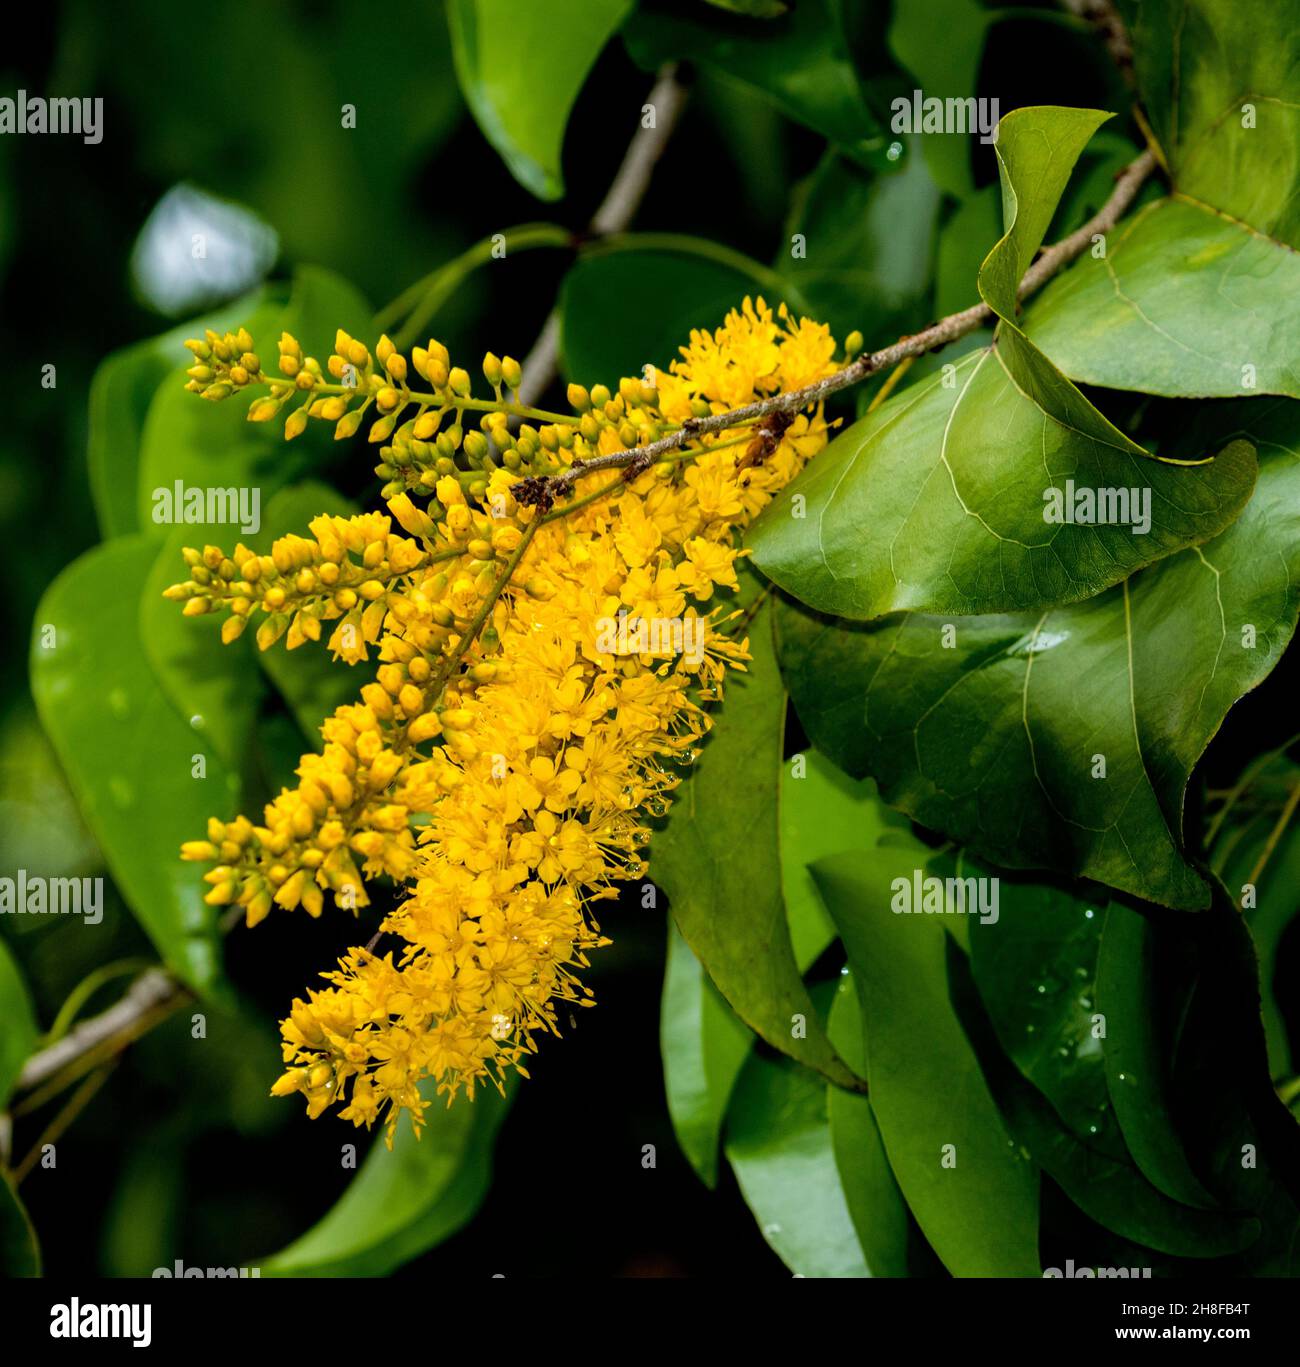 Cluster of golden yellow flowers of Barklya syringifolia, a rare Australian native tree, against a background of heart-shaped green leaves Stock Photo